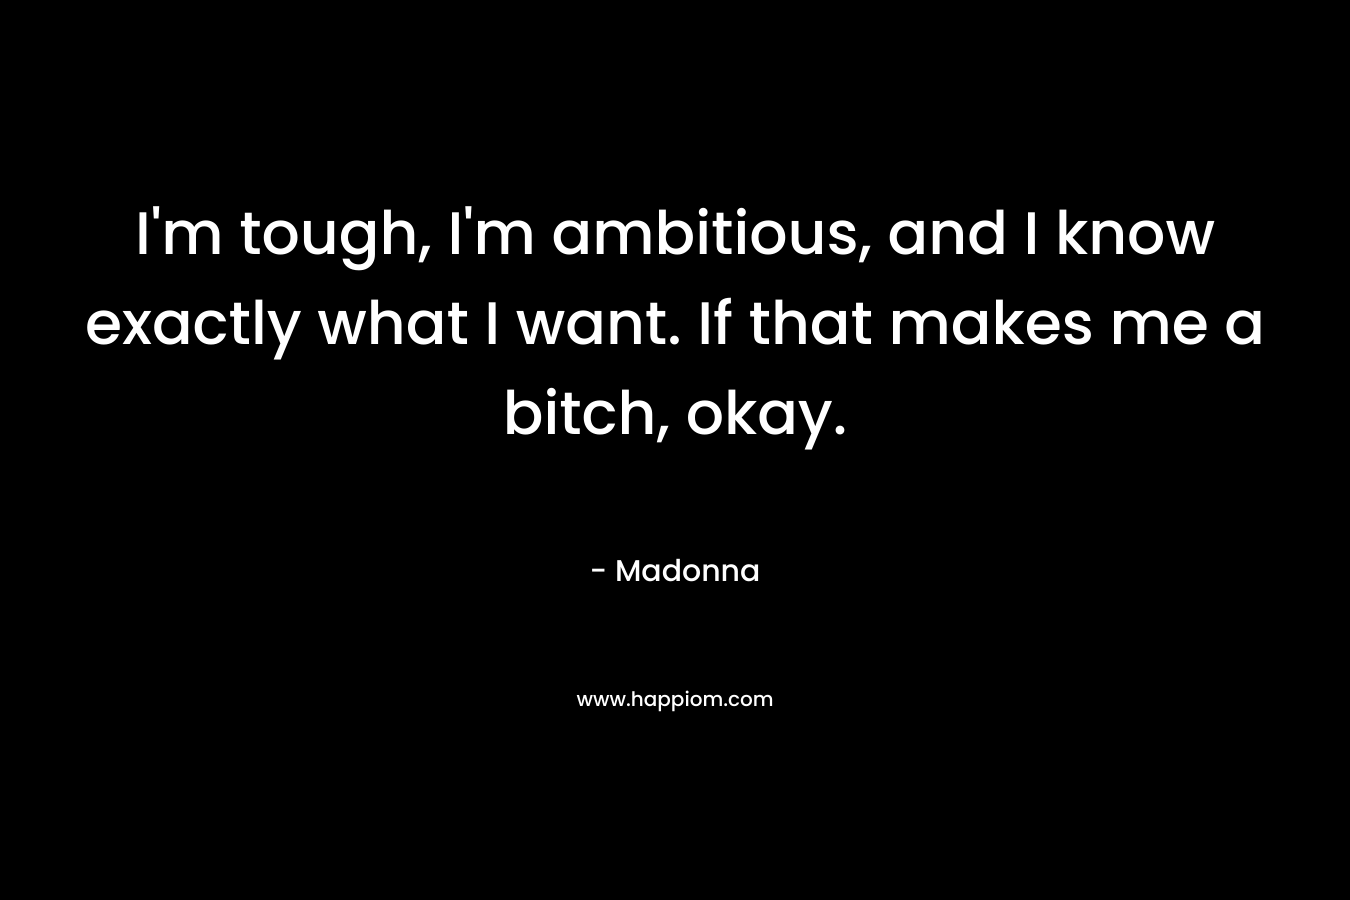 I’m tough, I’m ambitious, and I know exactly what I want. If that makes me a bitch, okay. – Madonna